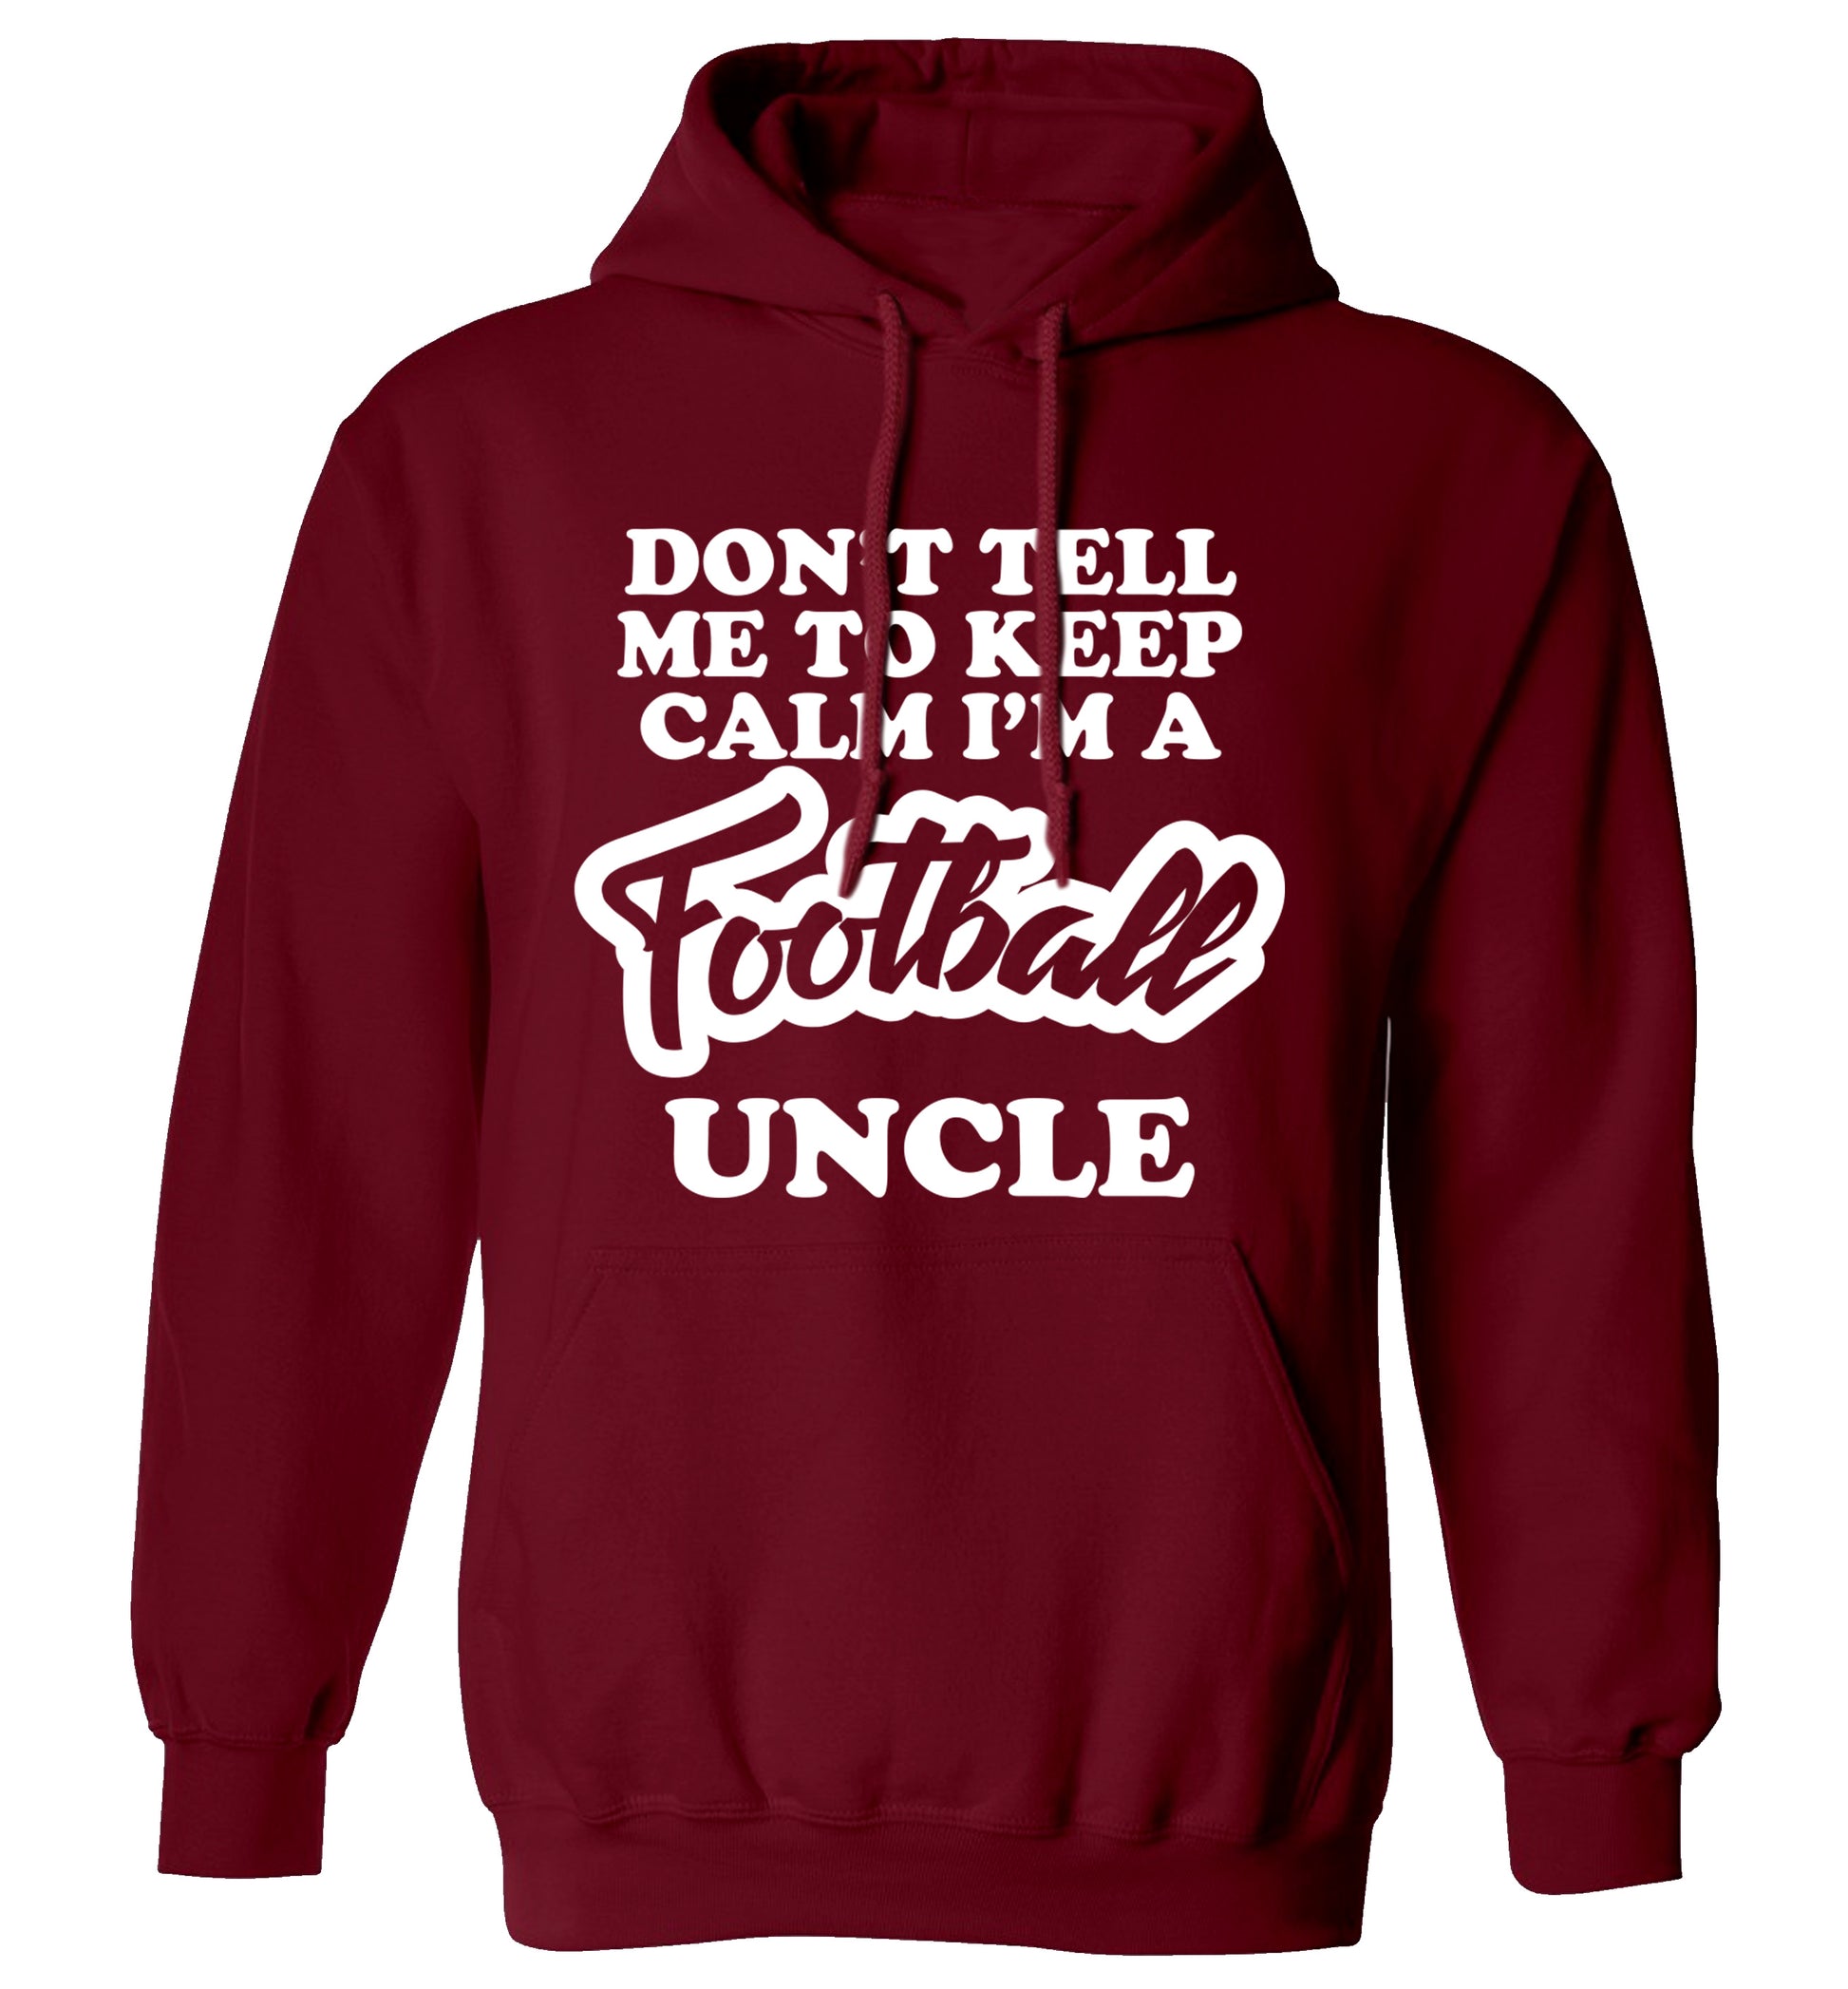 Worlds most amazing football uncle adults unisexmaroon hoodie 2XL